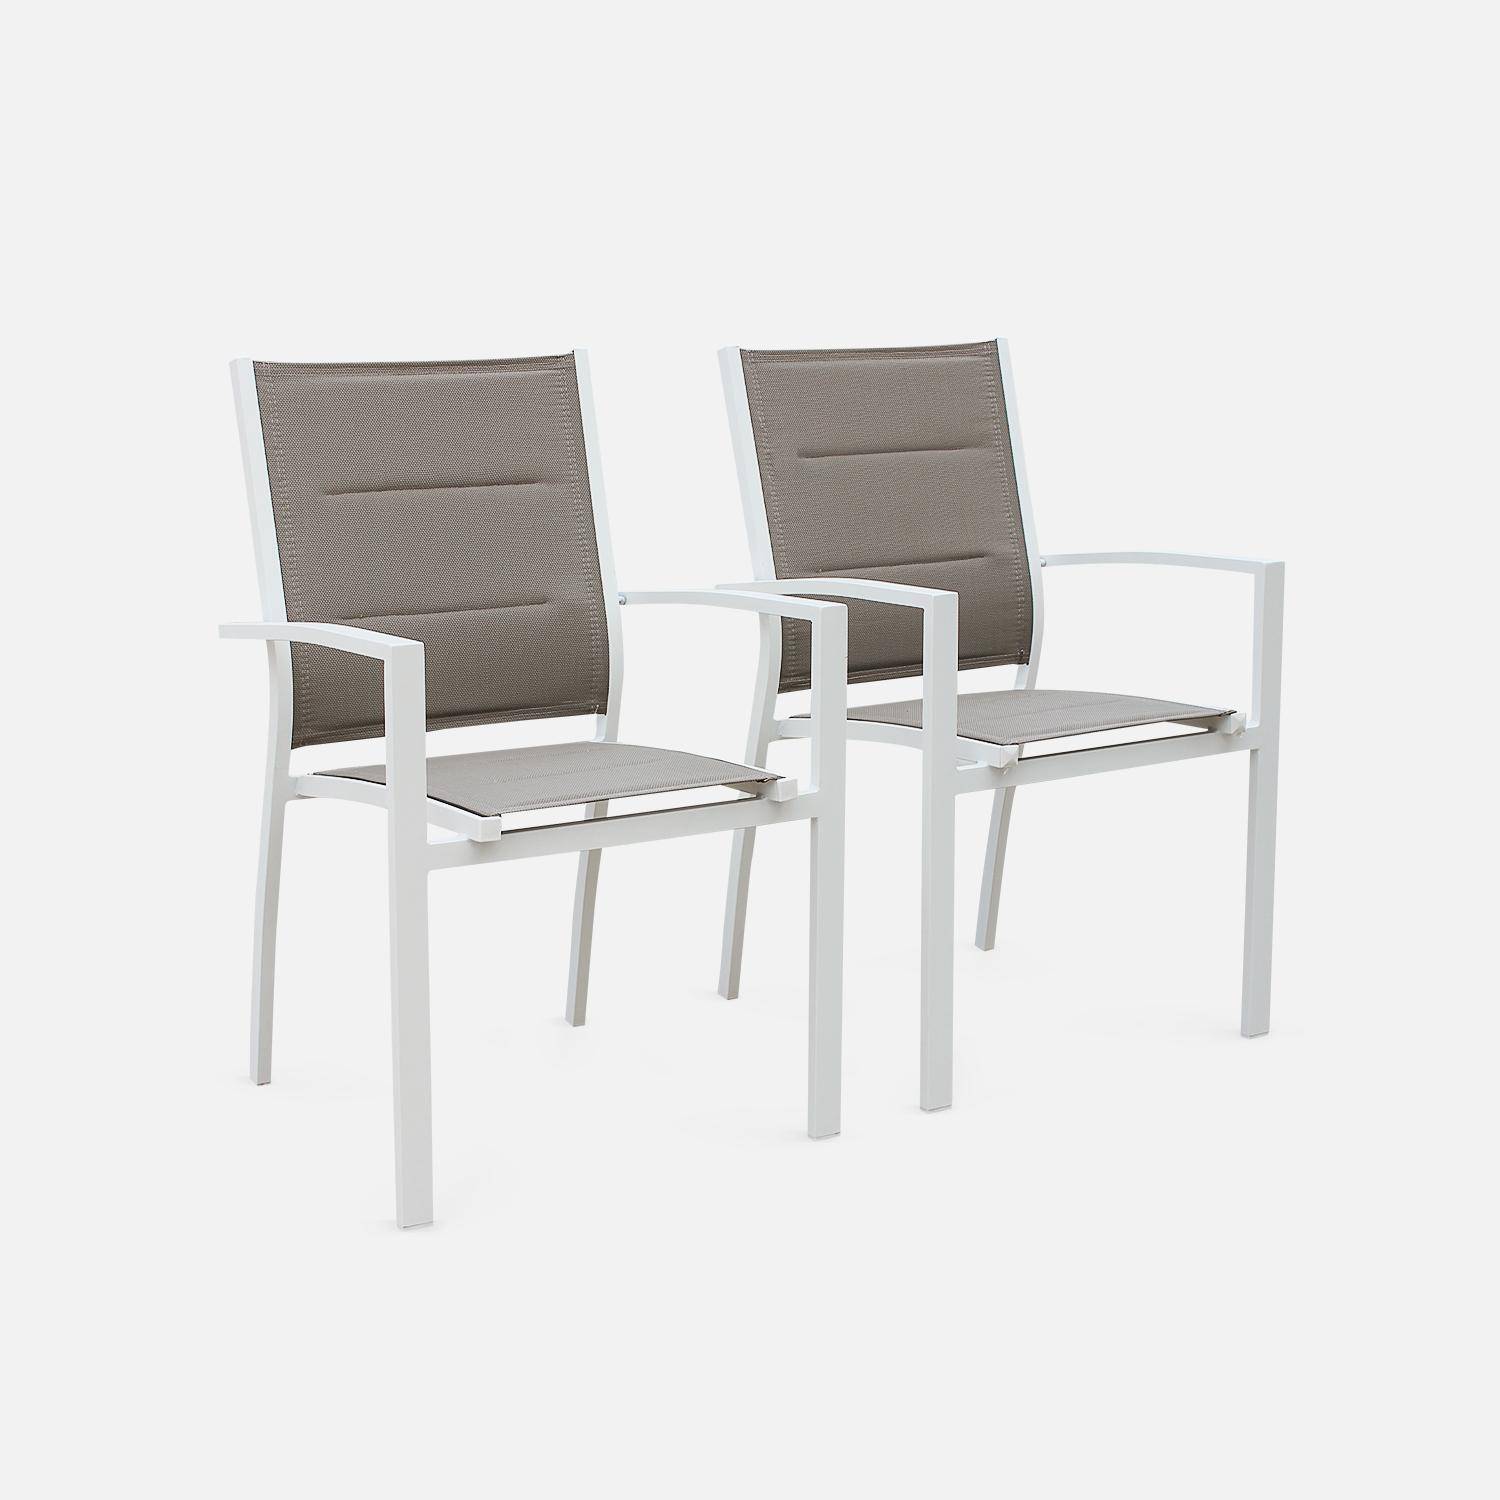 6-seater garden dining set, extendable 150-210cm aluminium table, 4 chairs and 2 armchairs - Chicago 6 - White frame, Beige-Brown textilene,sweeek,Photo7